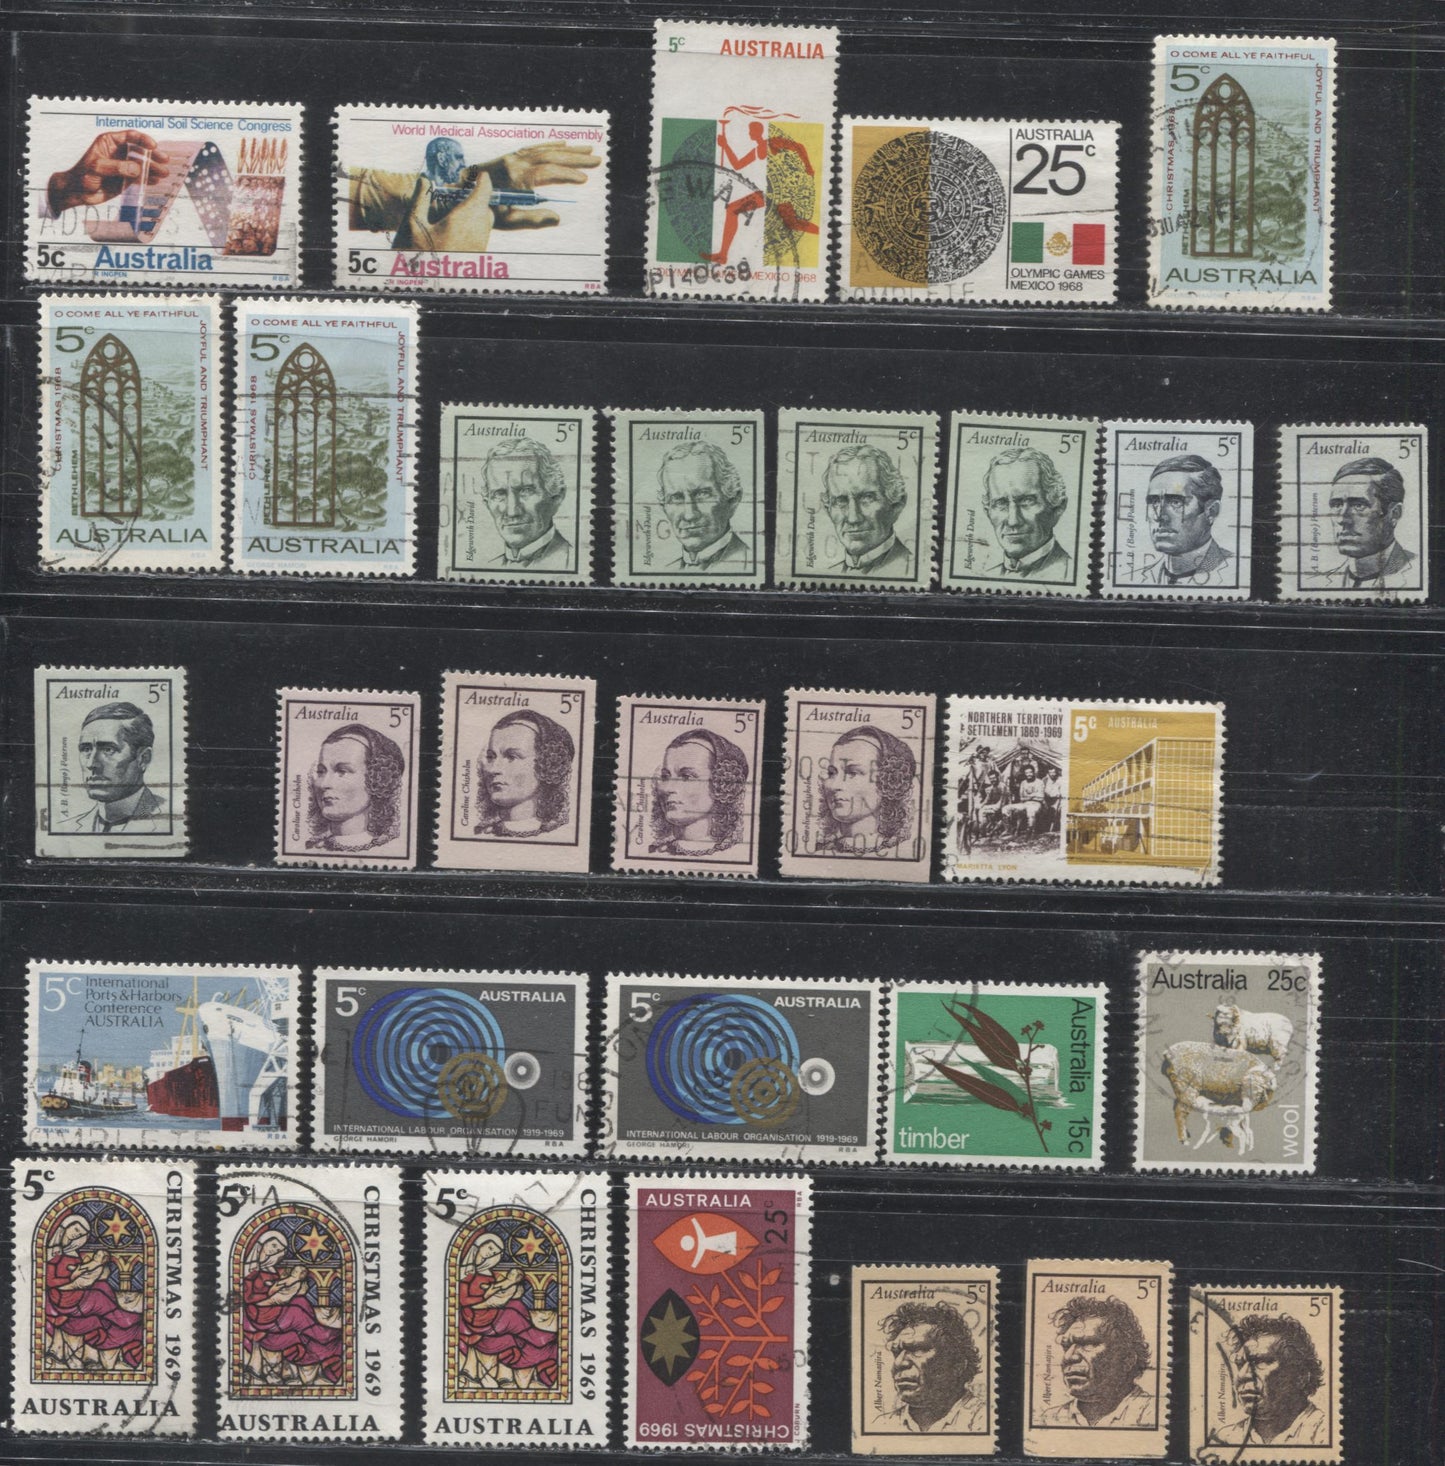 Australia #421/453 (SG#406/449) 1966-1968 Commemoratives and 1968-1971 Floral Definitives, A Specialized Lot of 72 Fine and VF Used Stamps